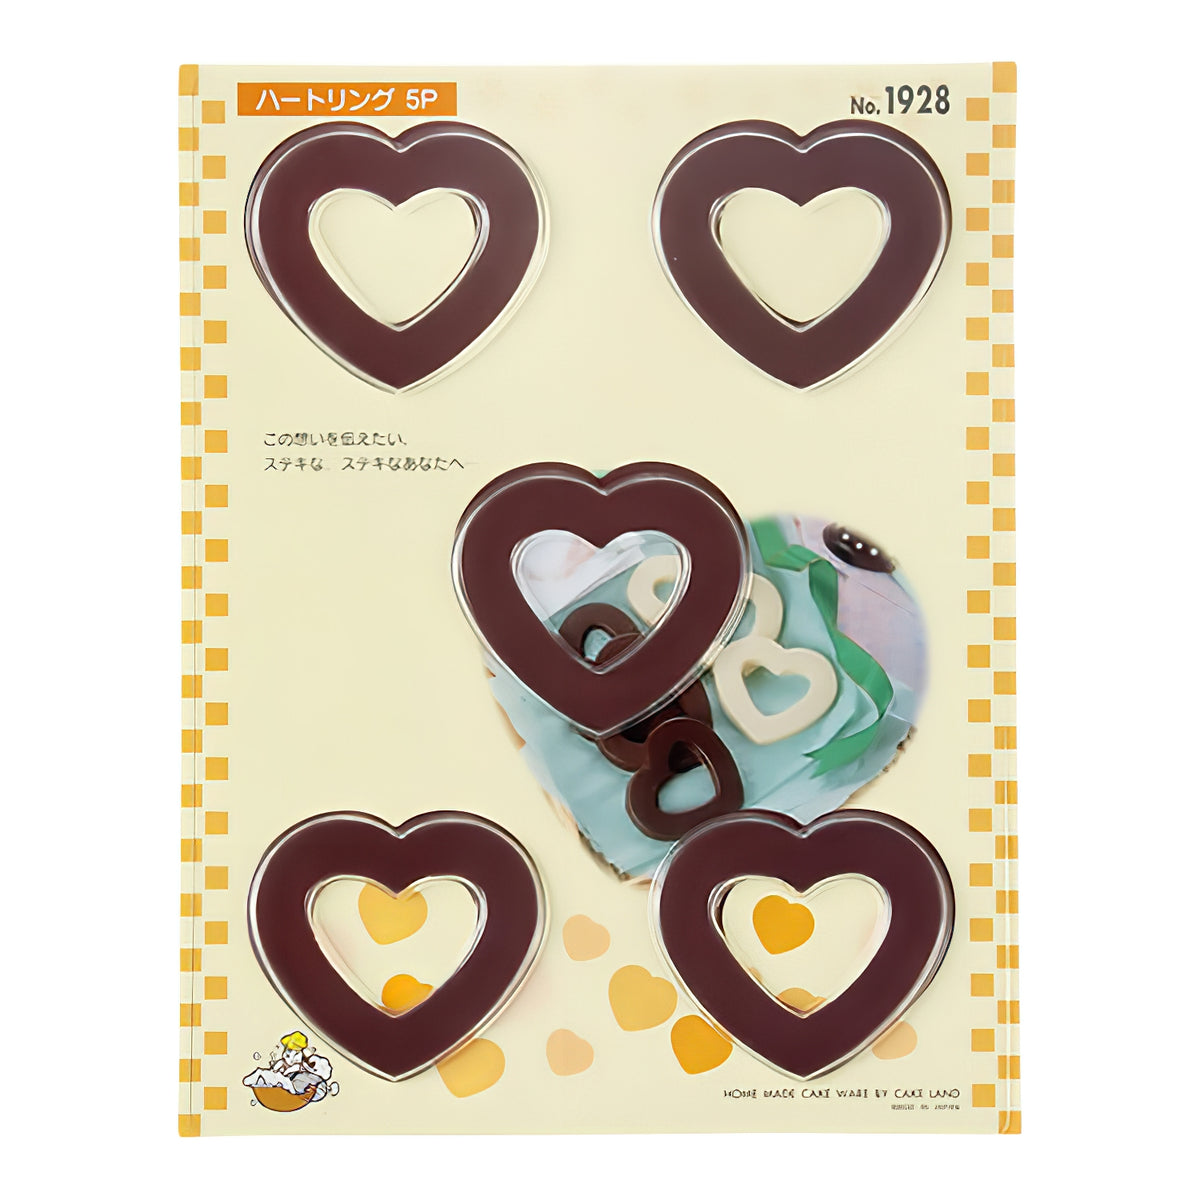 TIGERCROWN Polystyrene Heart Lolly Chocolate Mold - Globalkitchen